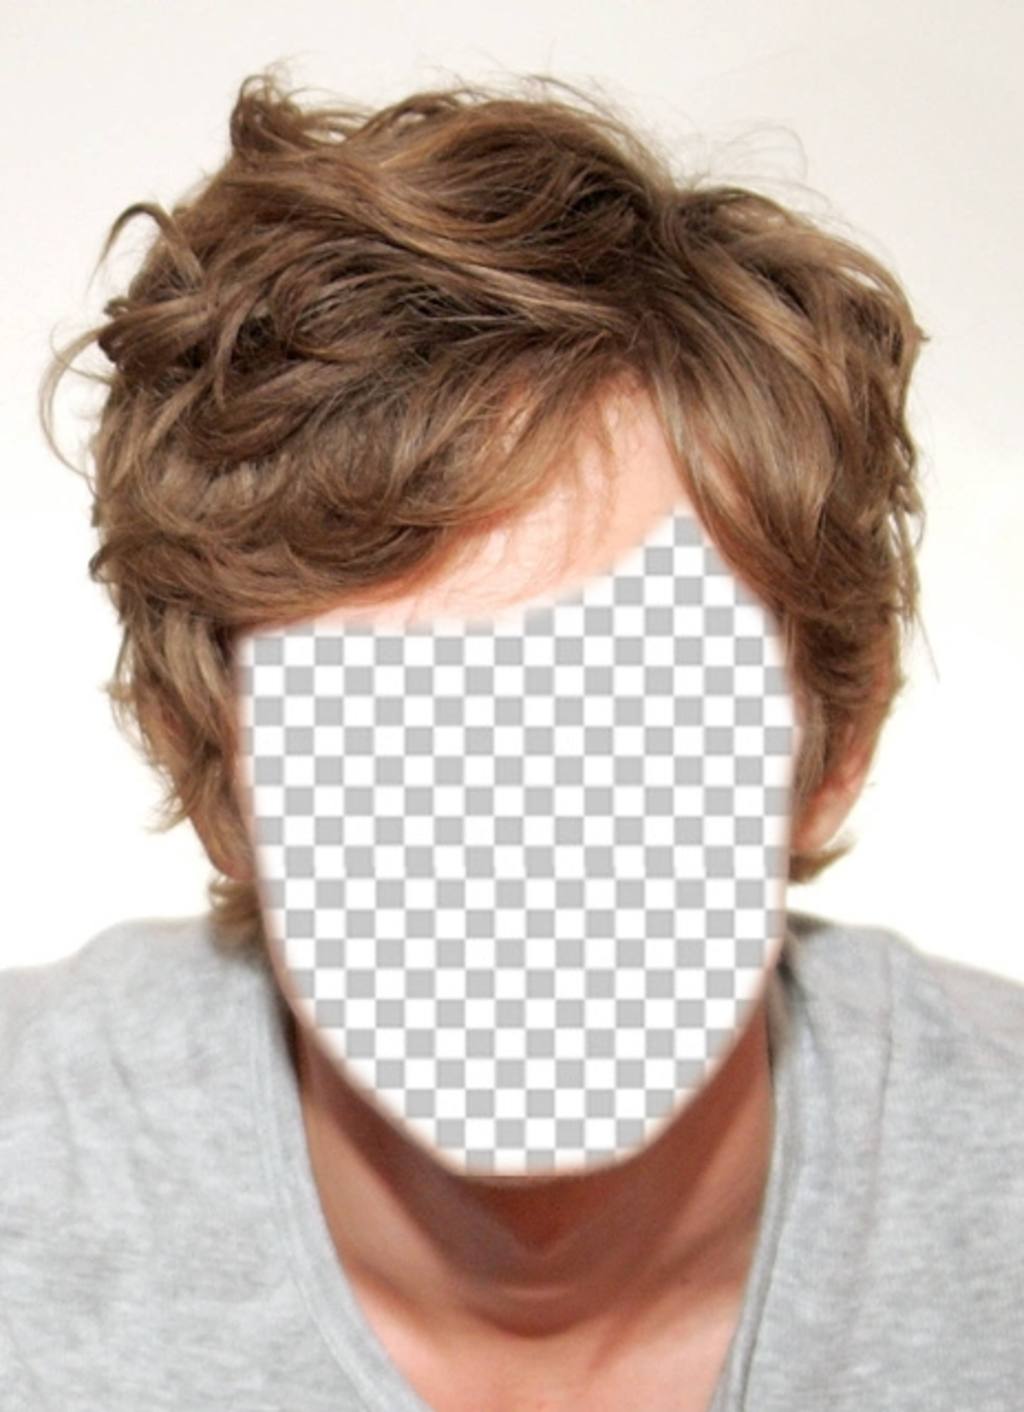 Free photomontage for men and to change the hair to blond  ..